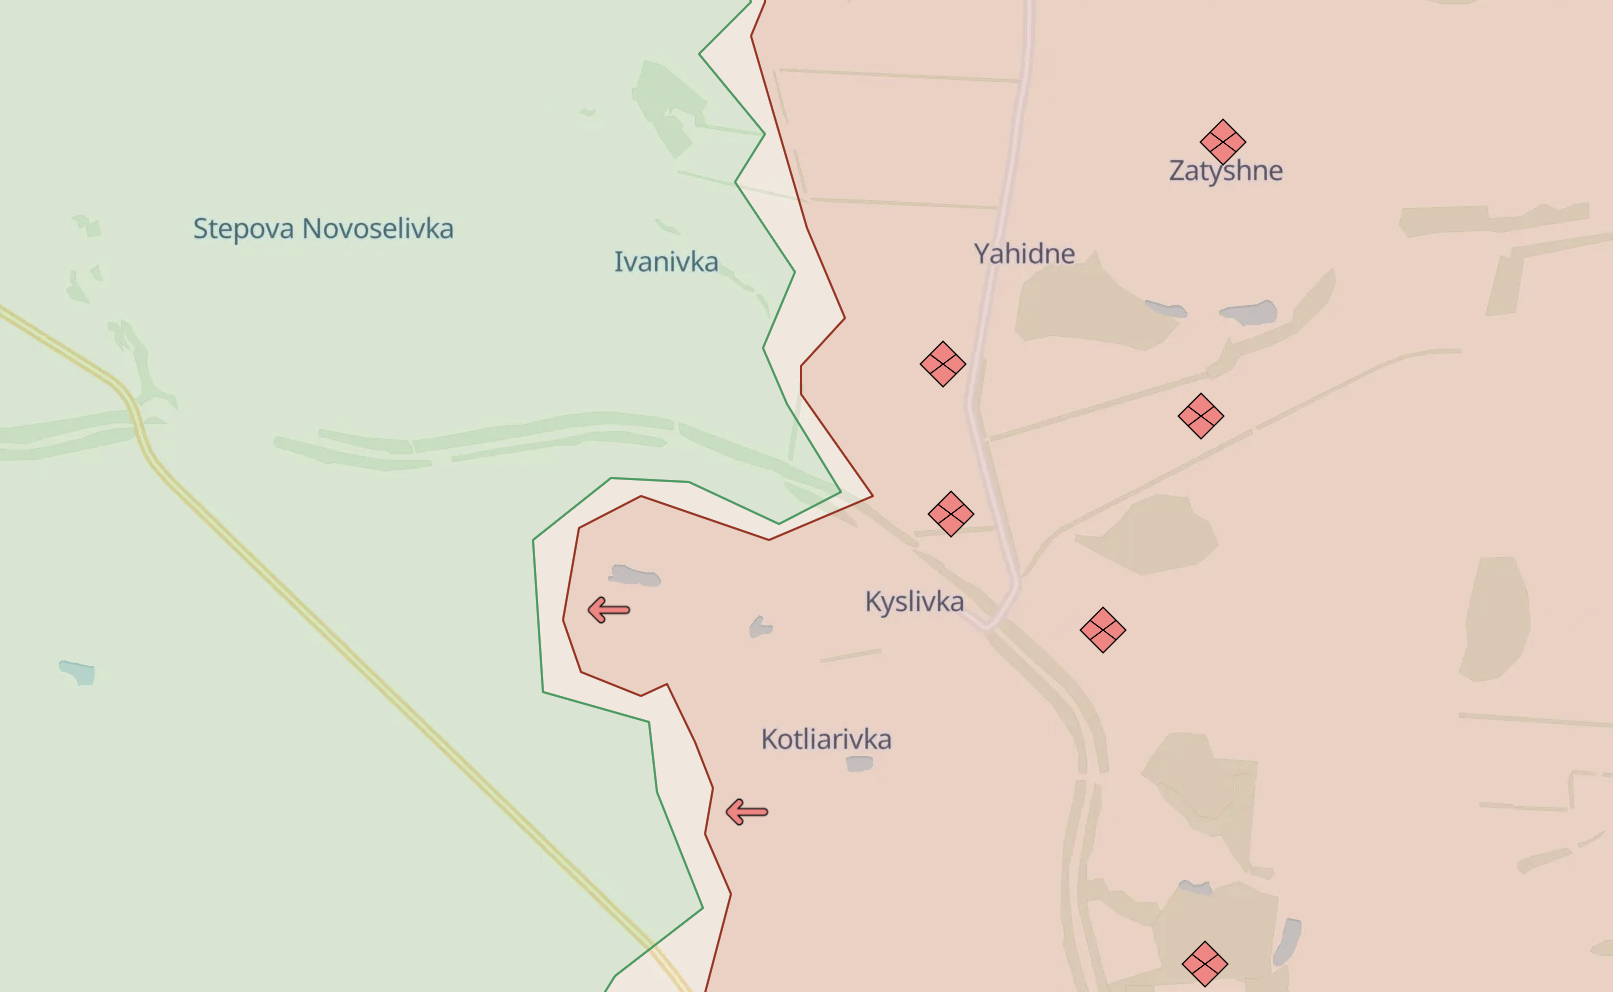 DeepStateMap's map of the frontline area, where Kotliarivka and Kyslivka are marked as Russian-occupied villages / Source: DeepState UA 